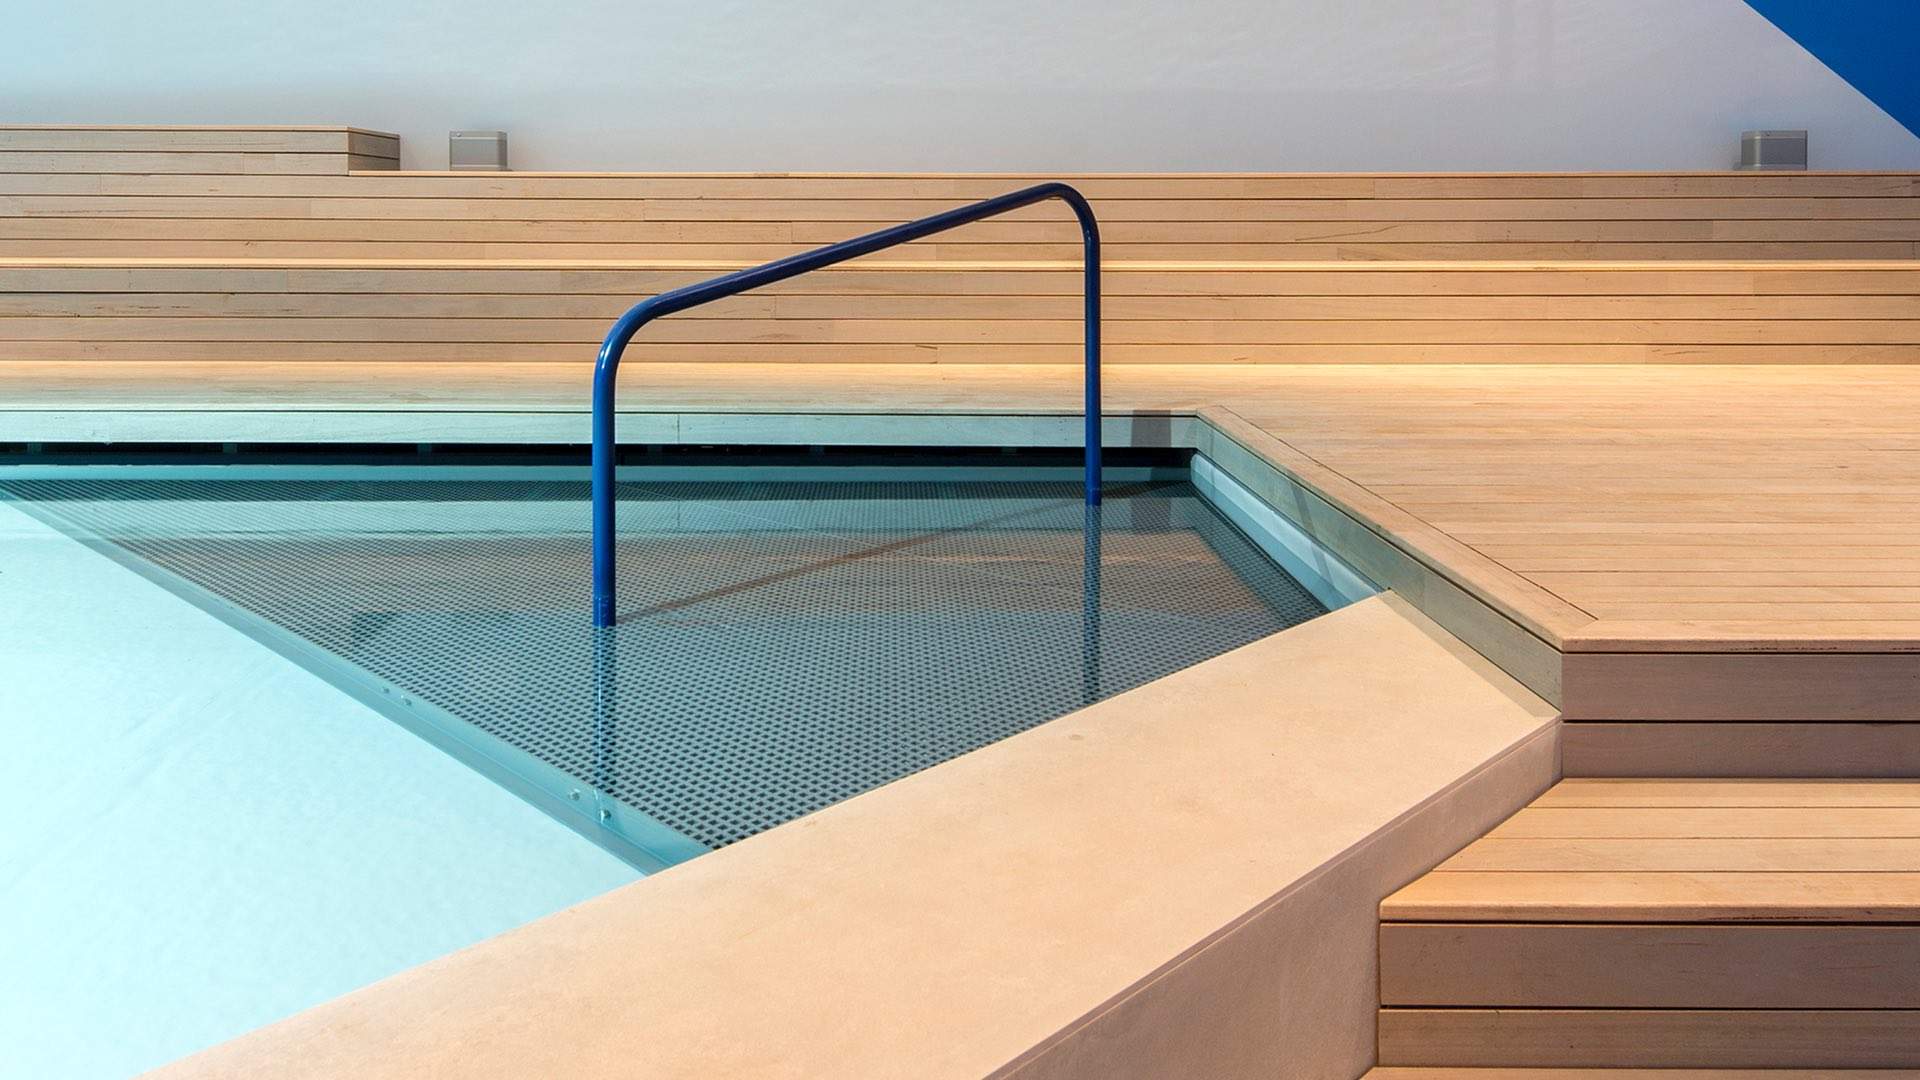 The Pool: Architecture, Culture and Identity